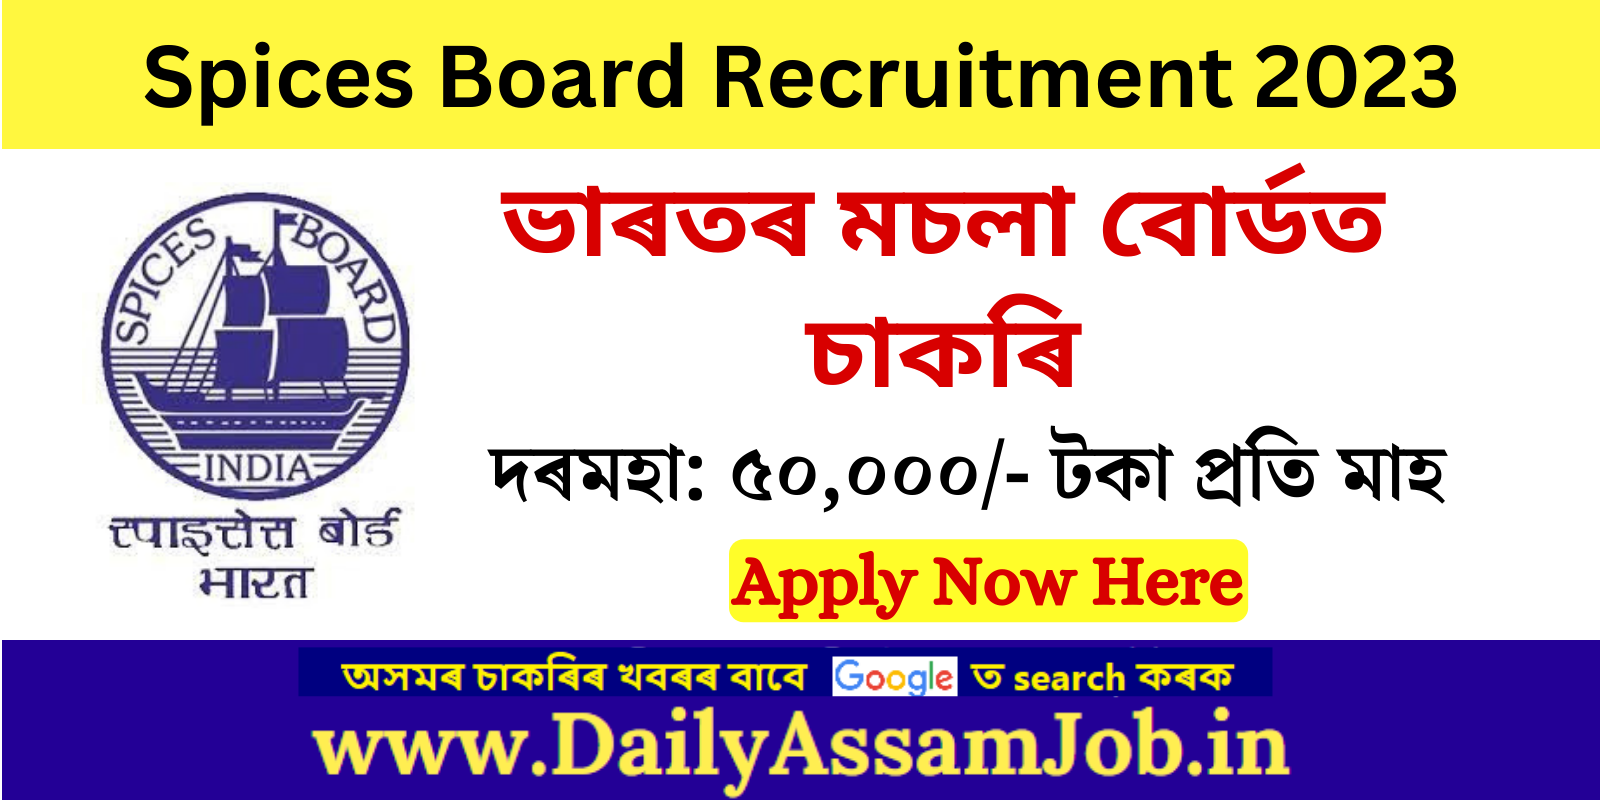 Assam Career :: Spices Board Recruitment 2023 for Legal Consultant Vacancy